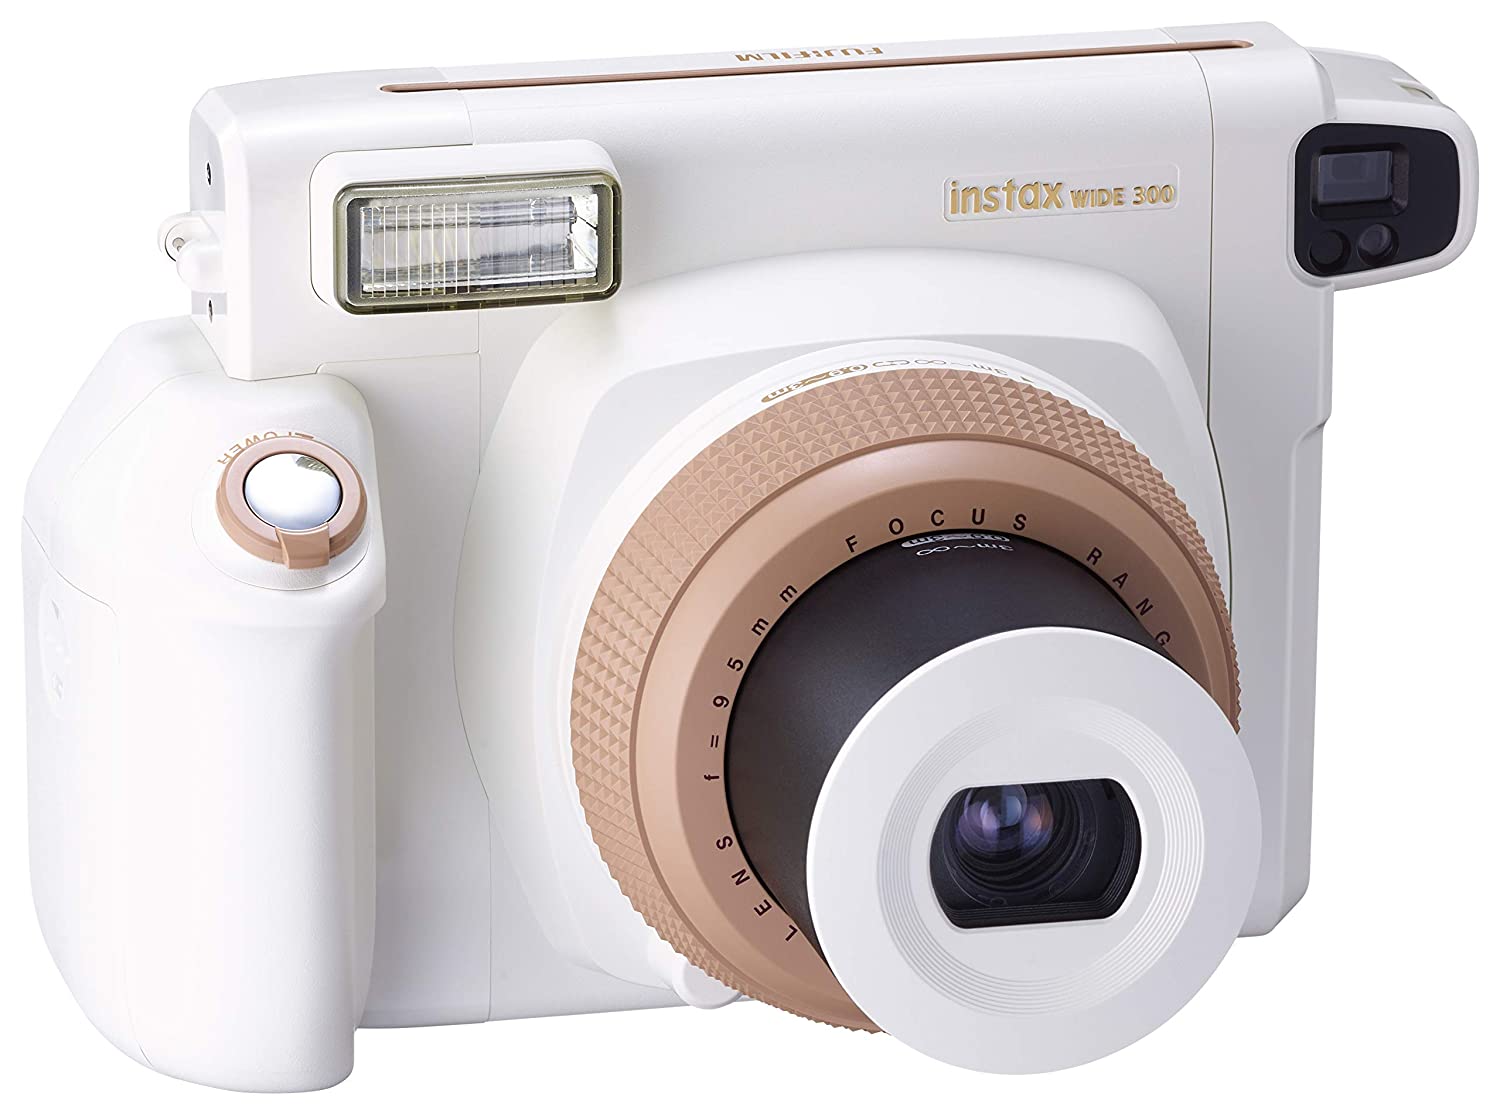 Fujifilm Instax 300 Wide Instant Camera with 20 Shots